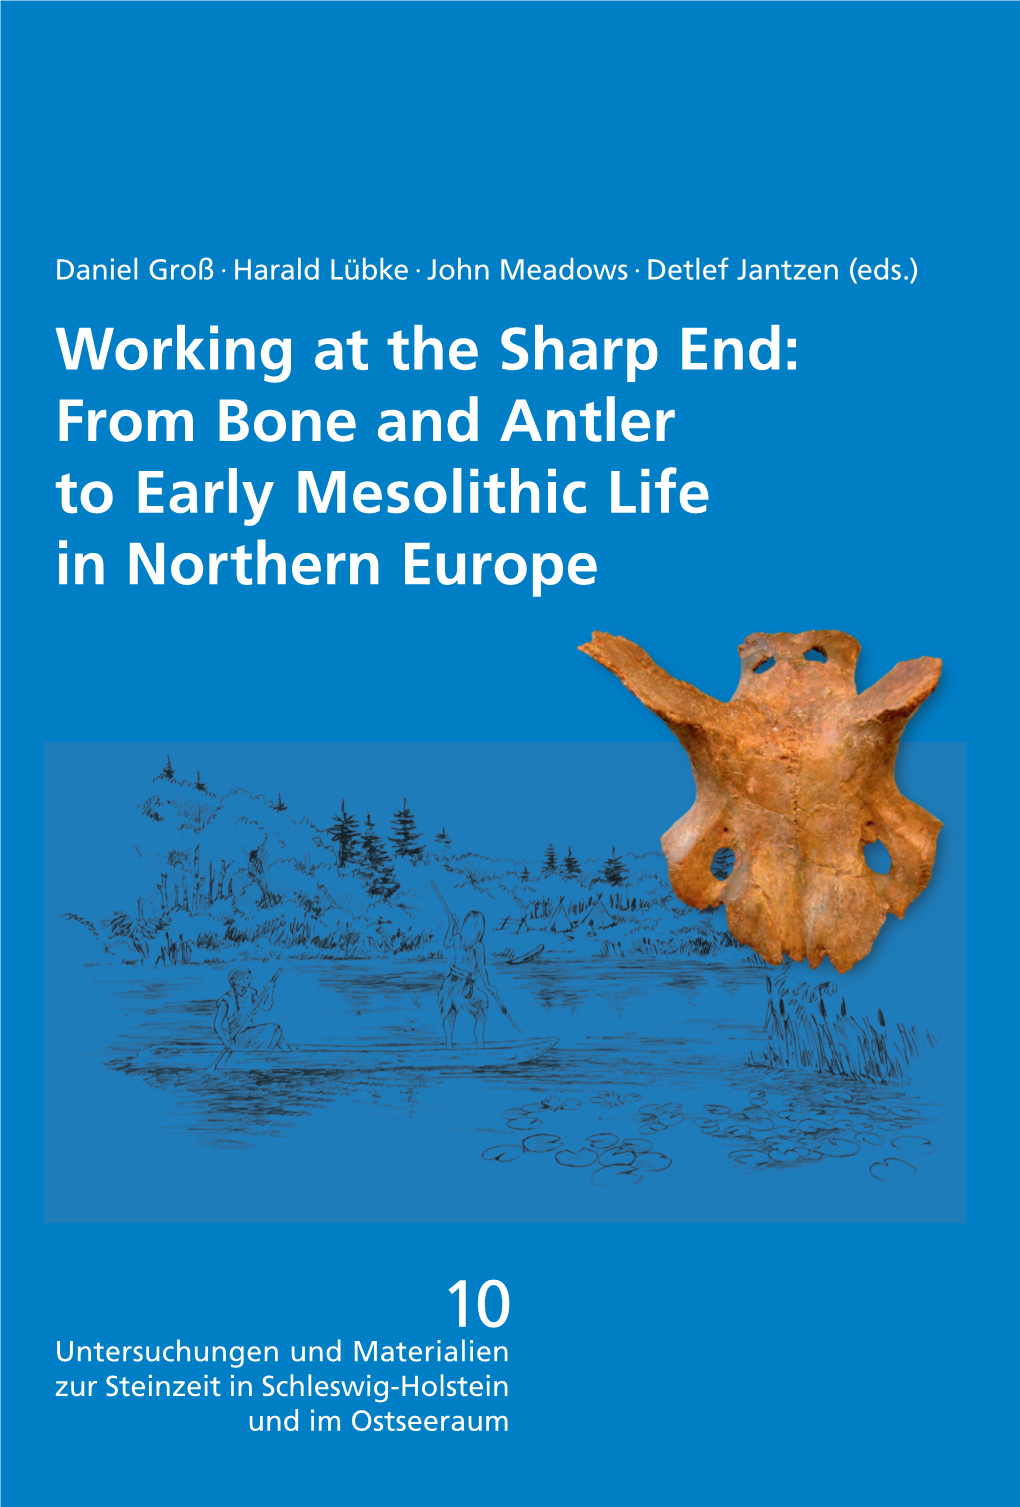 From Bone and Antler to Early Mesolithic Life in Northern Europe